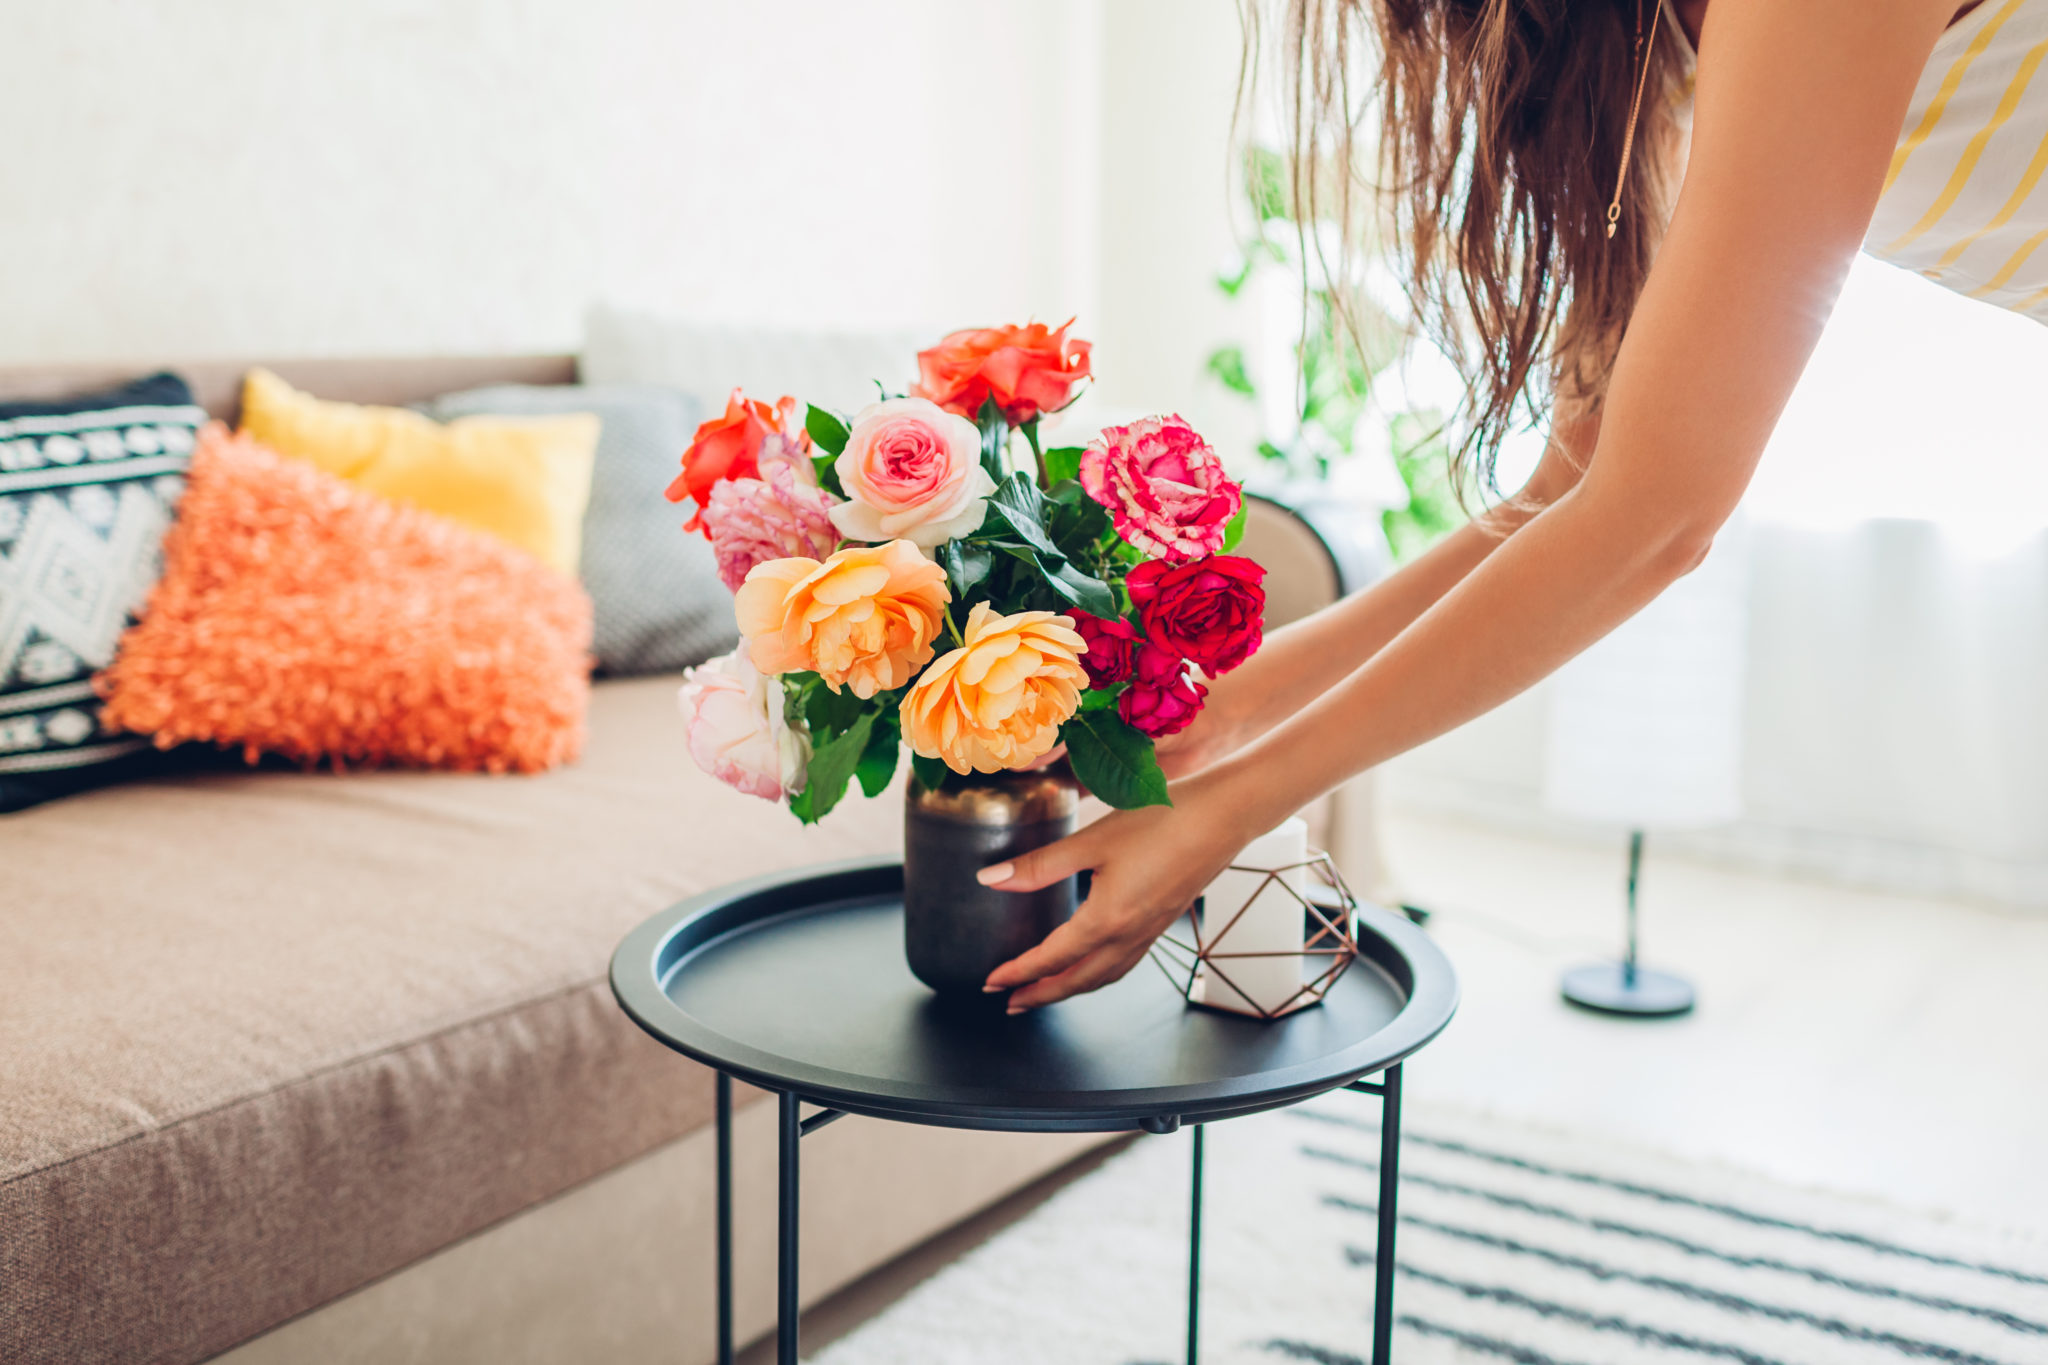 How to Decorate Your Living Space With Fresh Flowers and Greenery